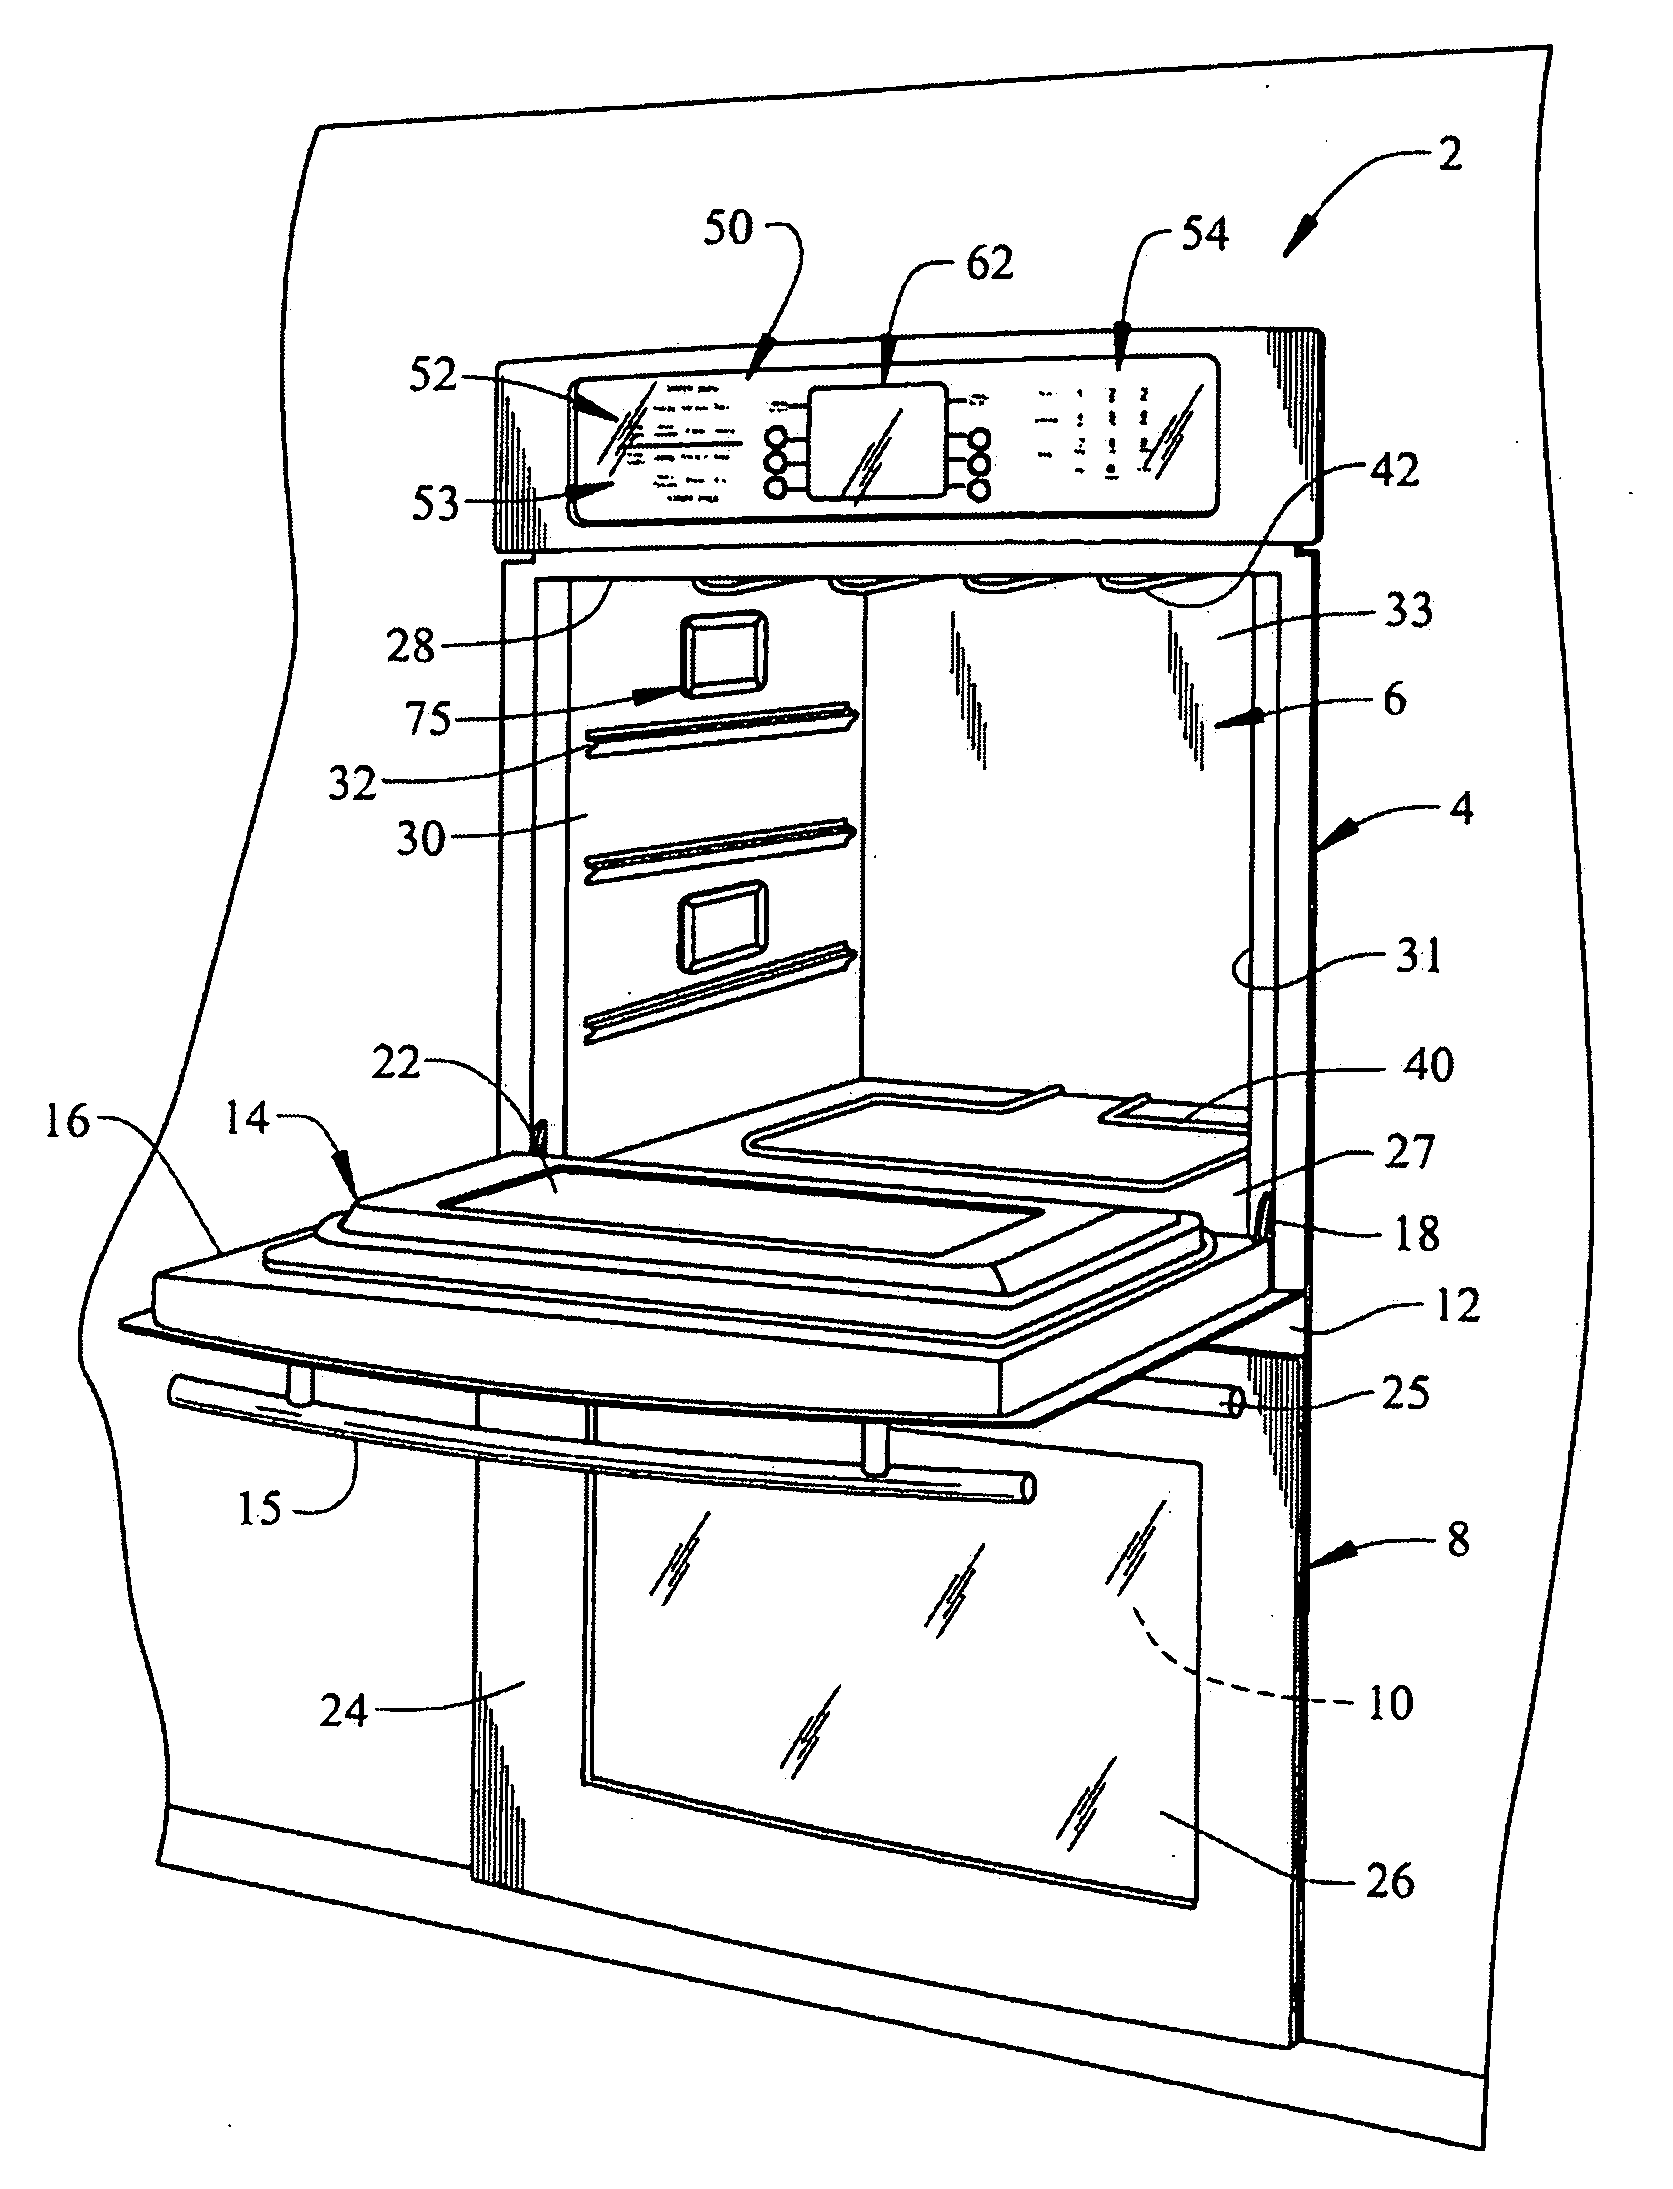 Lighting system for cooking appliance